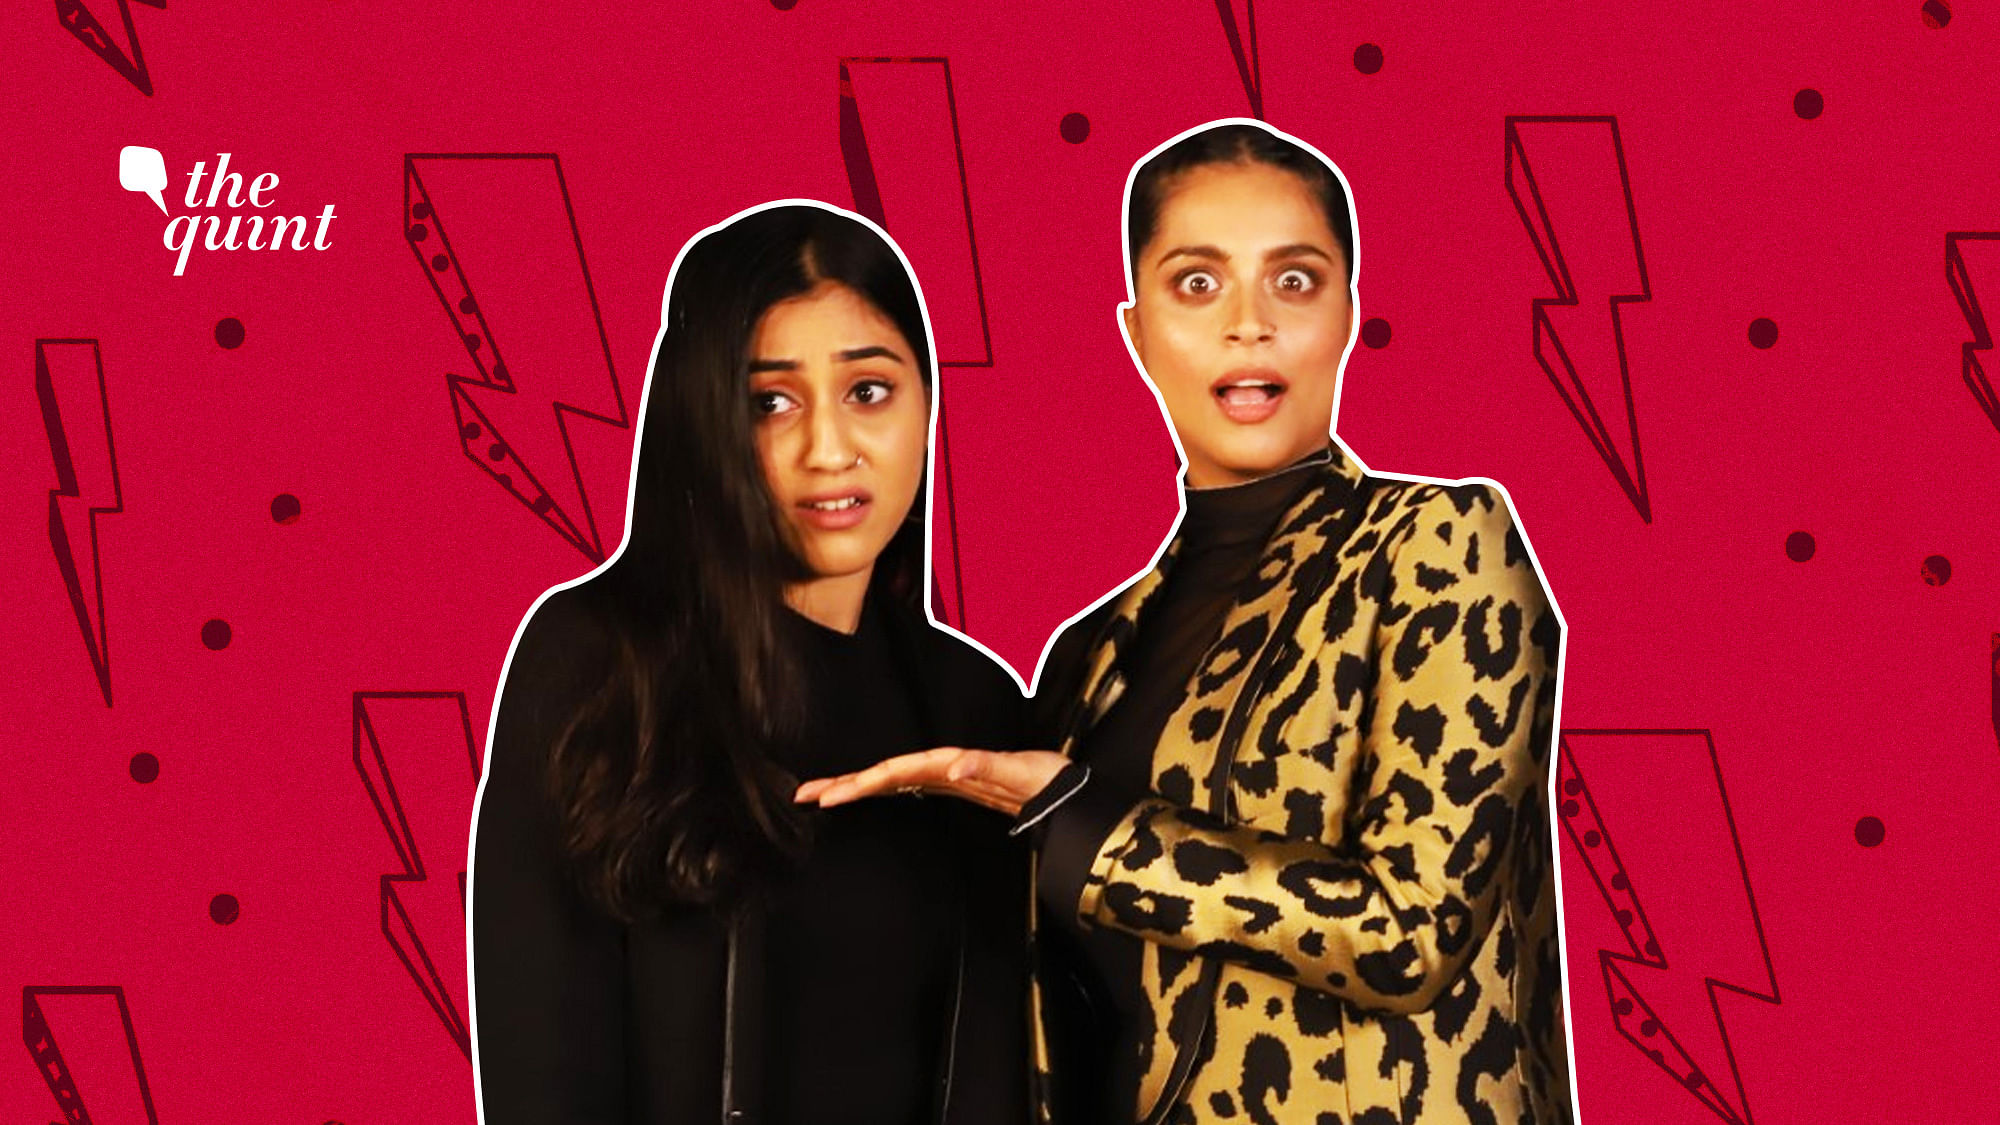 Lilly has spoken  about the significance of being one of the few women ever to host a US talk show.